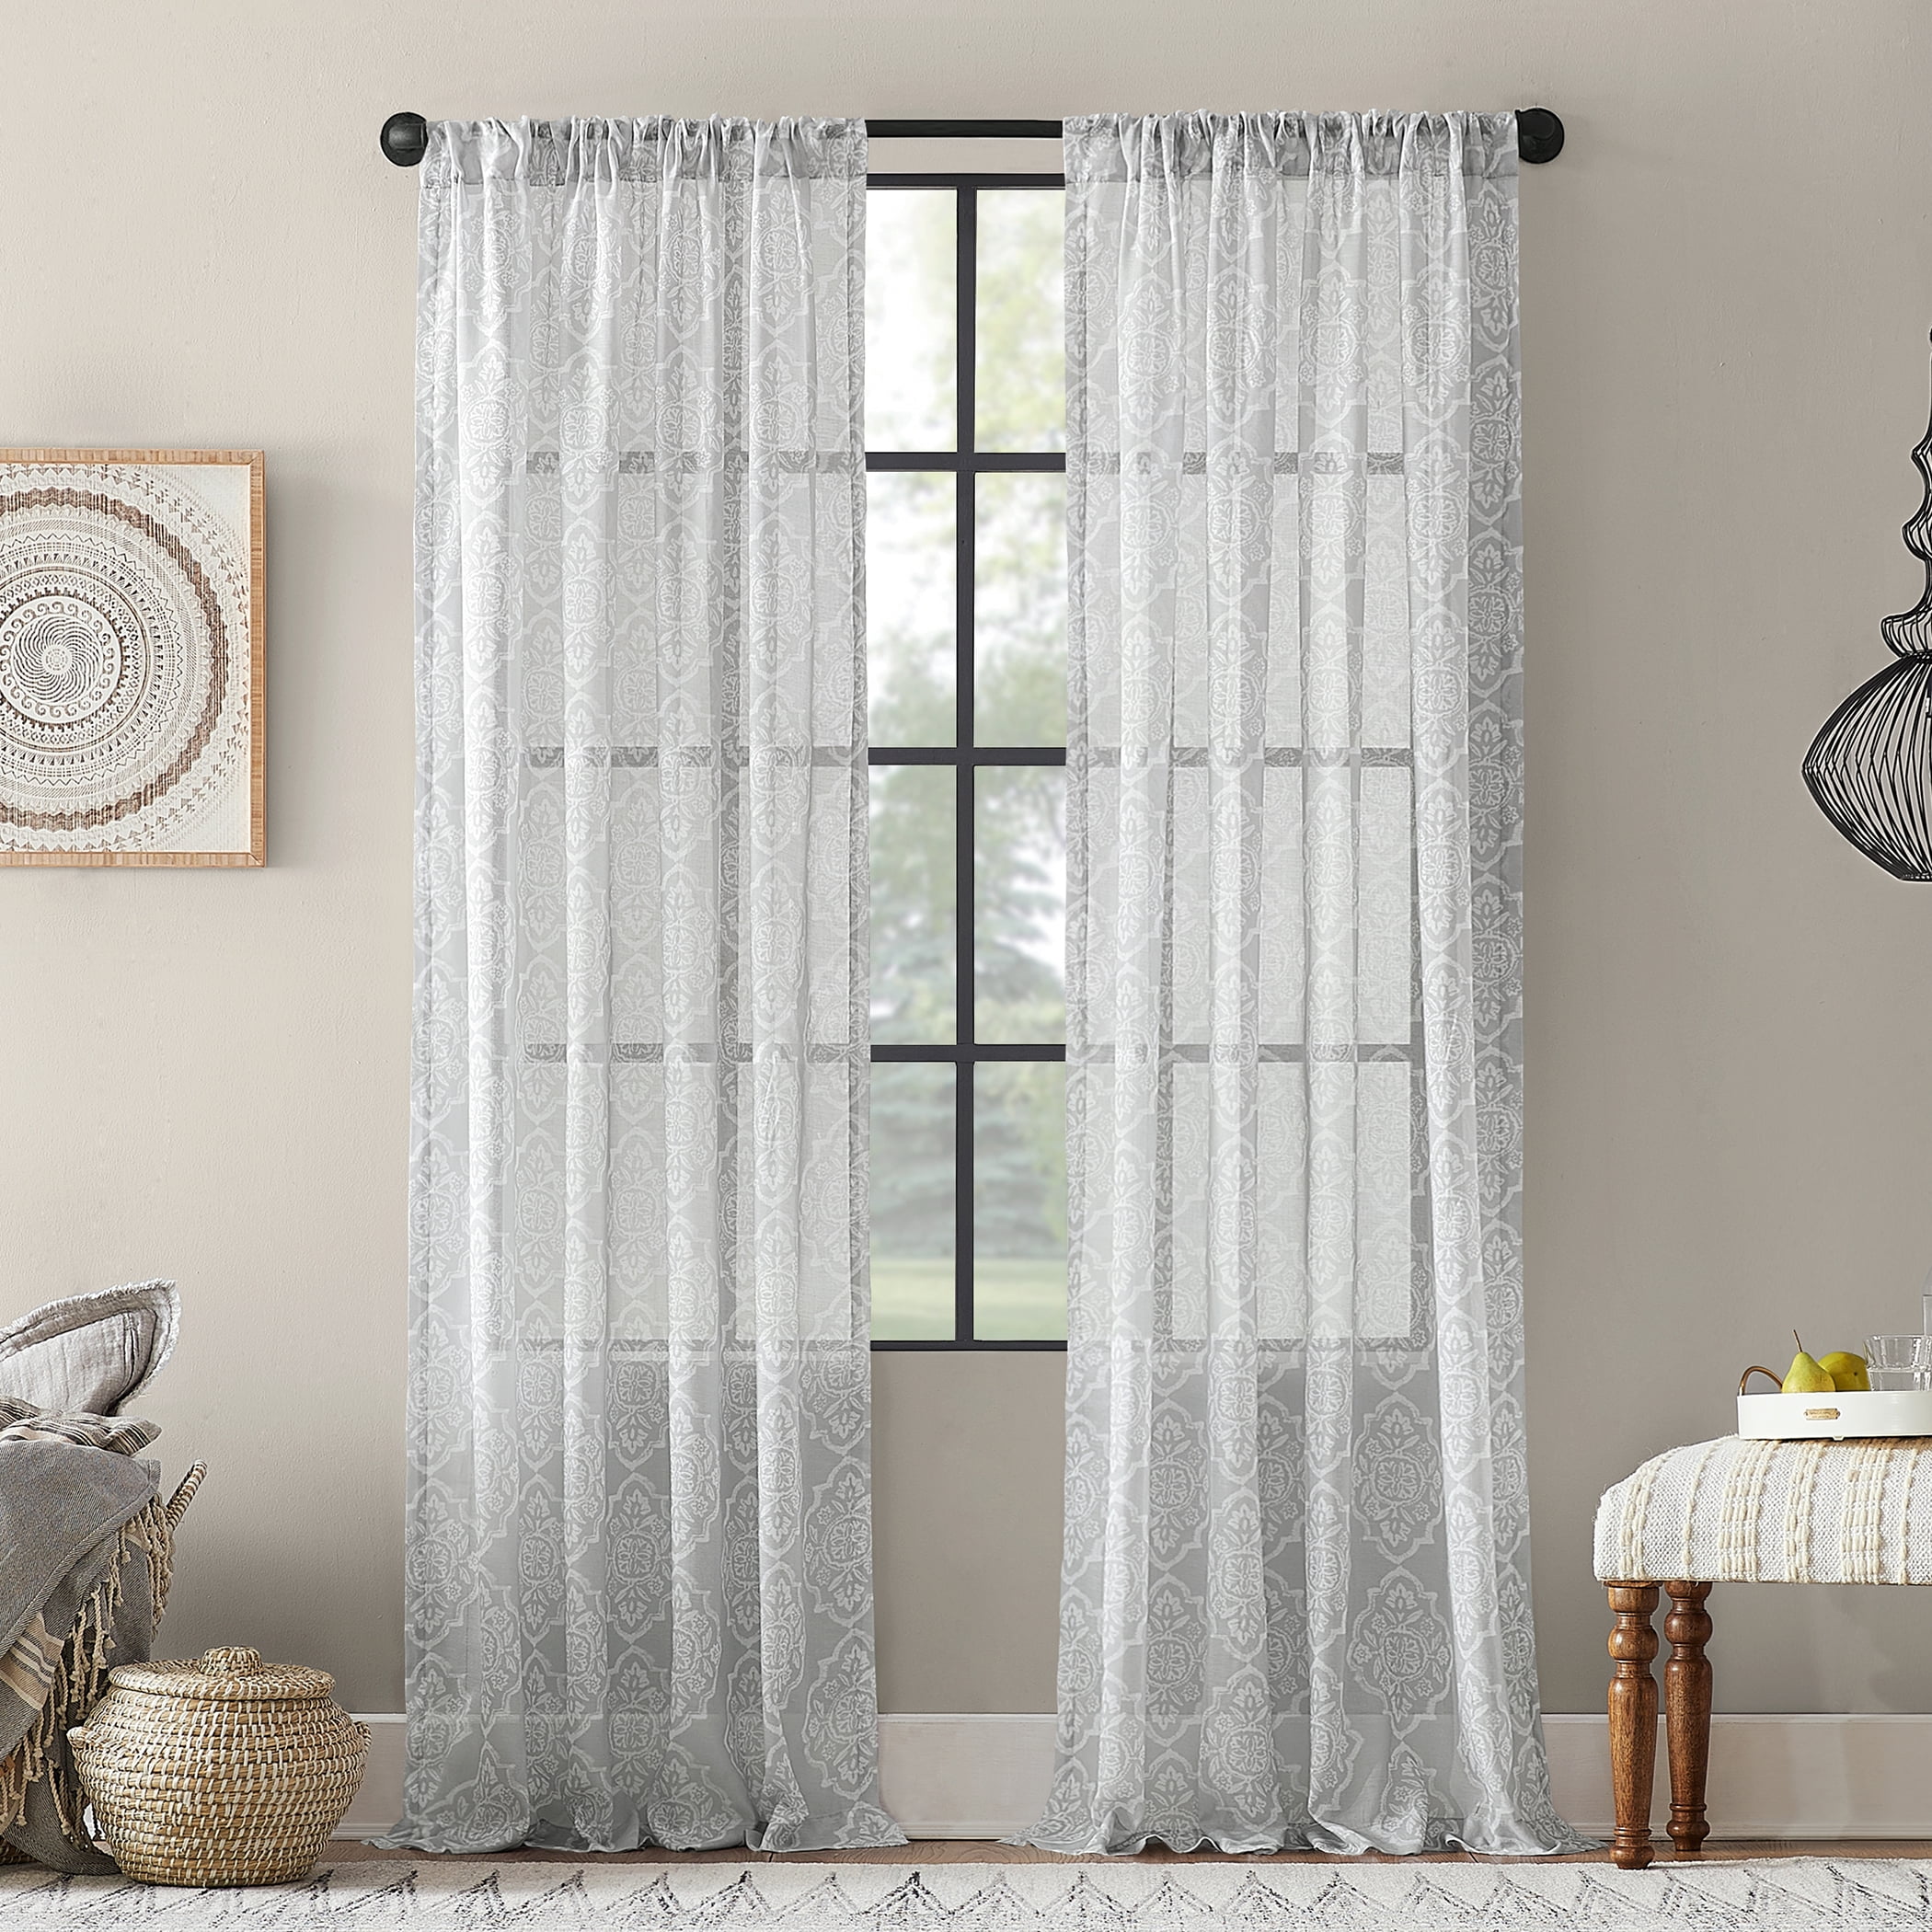 54" x 95" Archaeo Textured Cotton Blend Sheer Curtain Gray 